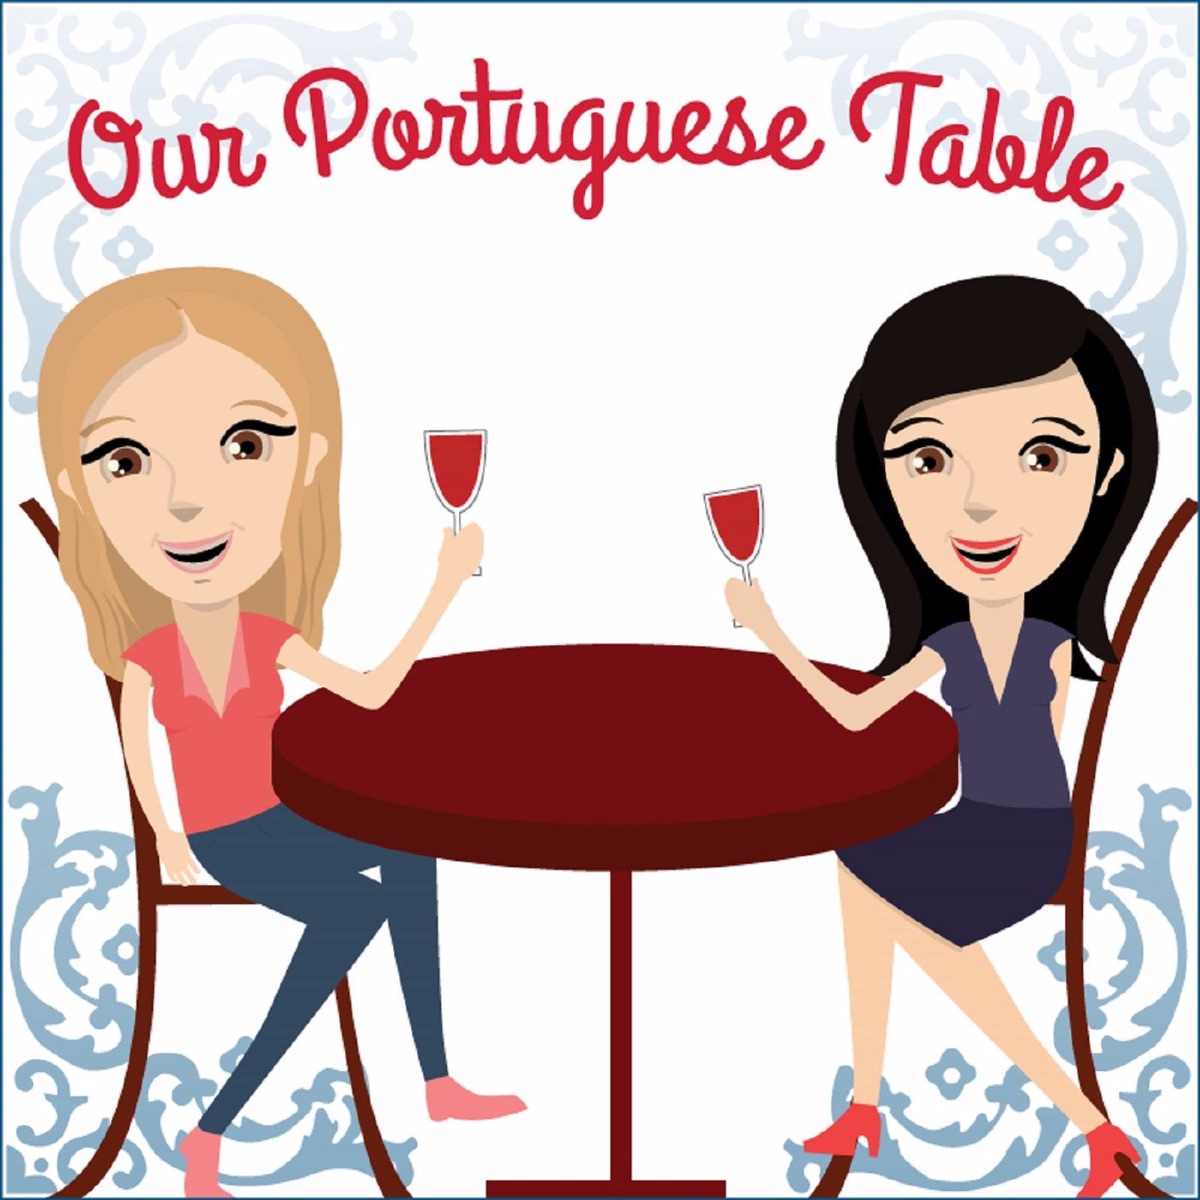 For the Love of Portuguese Food / Milena Rodrigues - My favorite